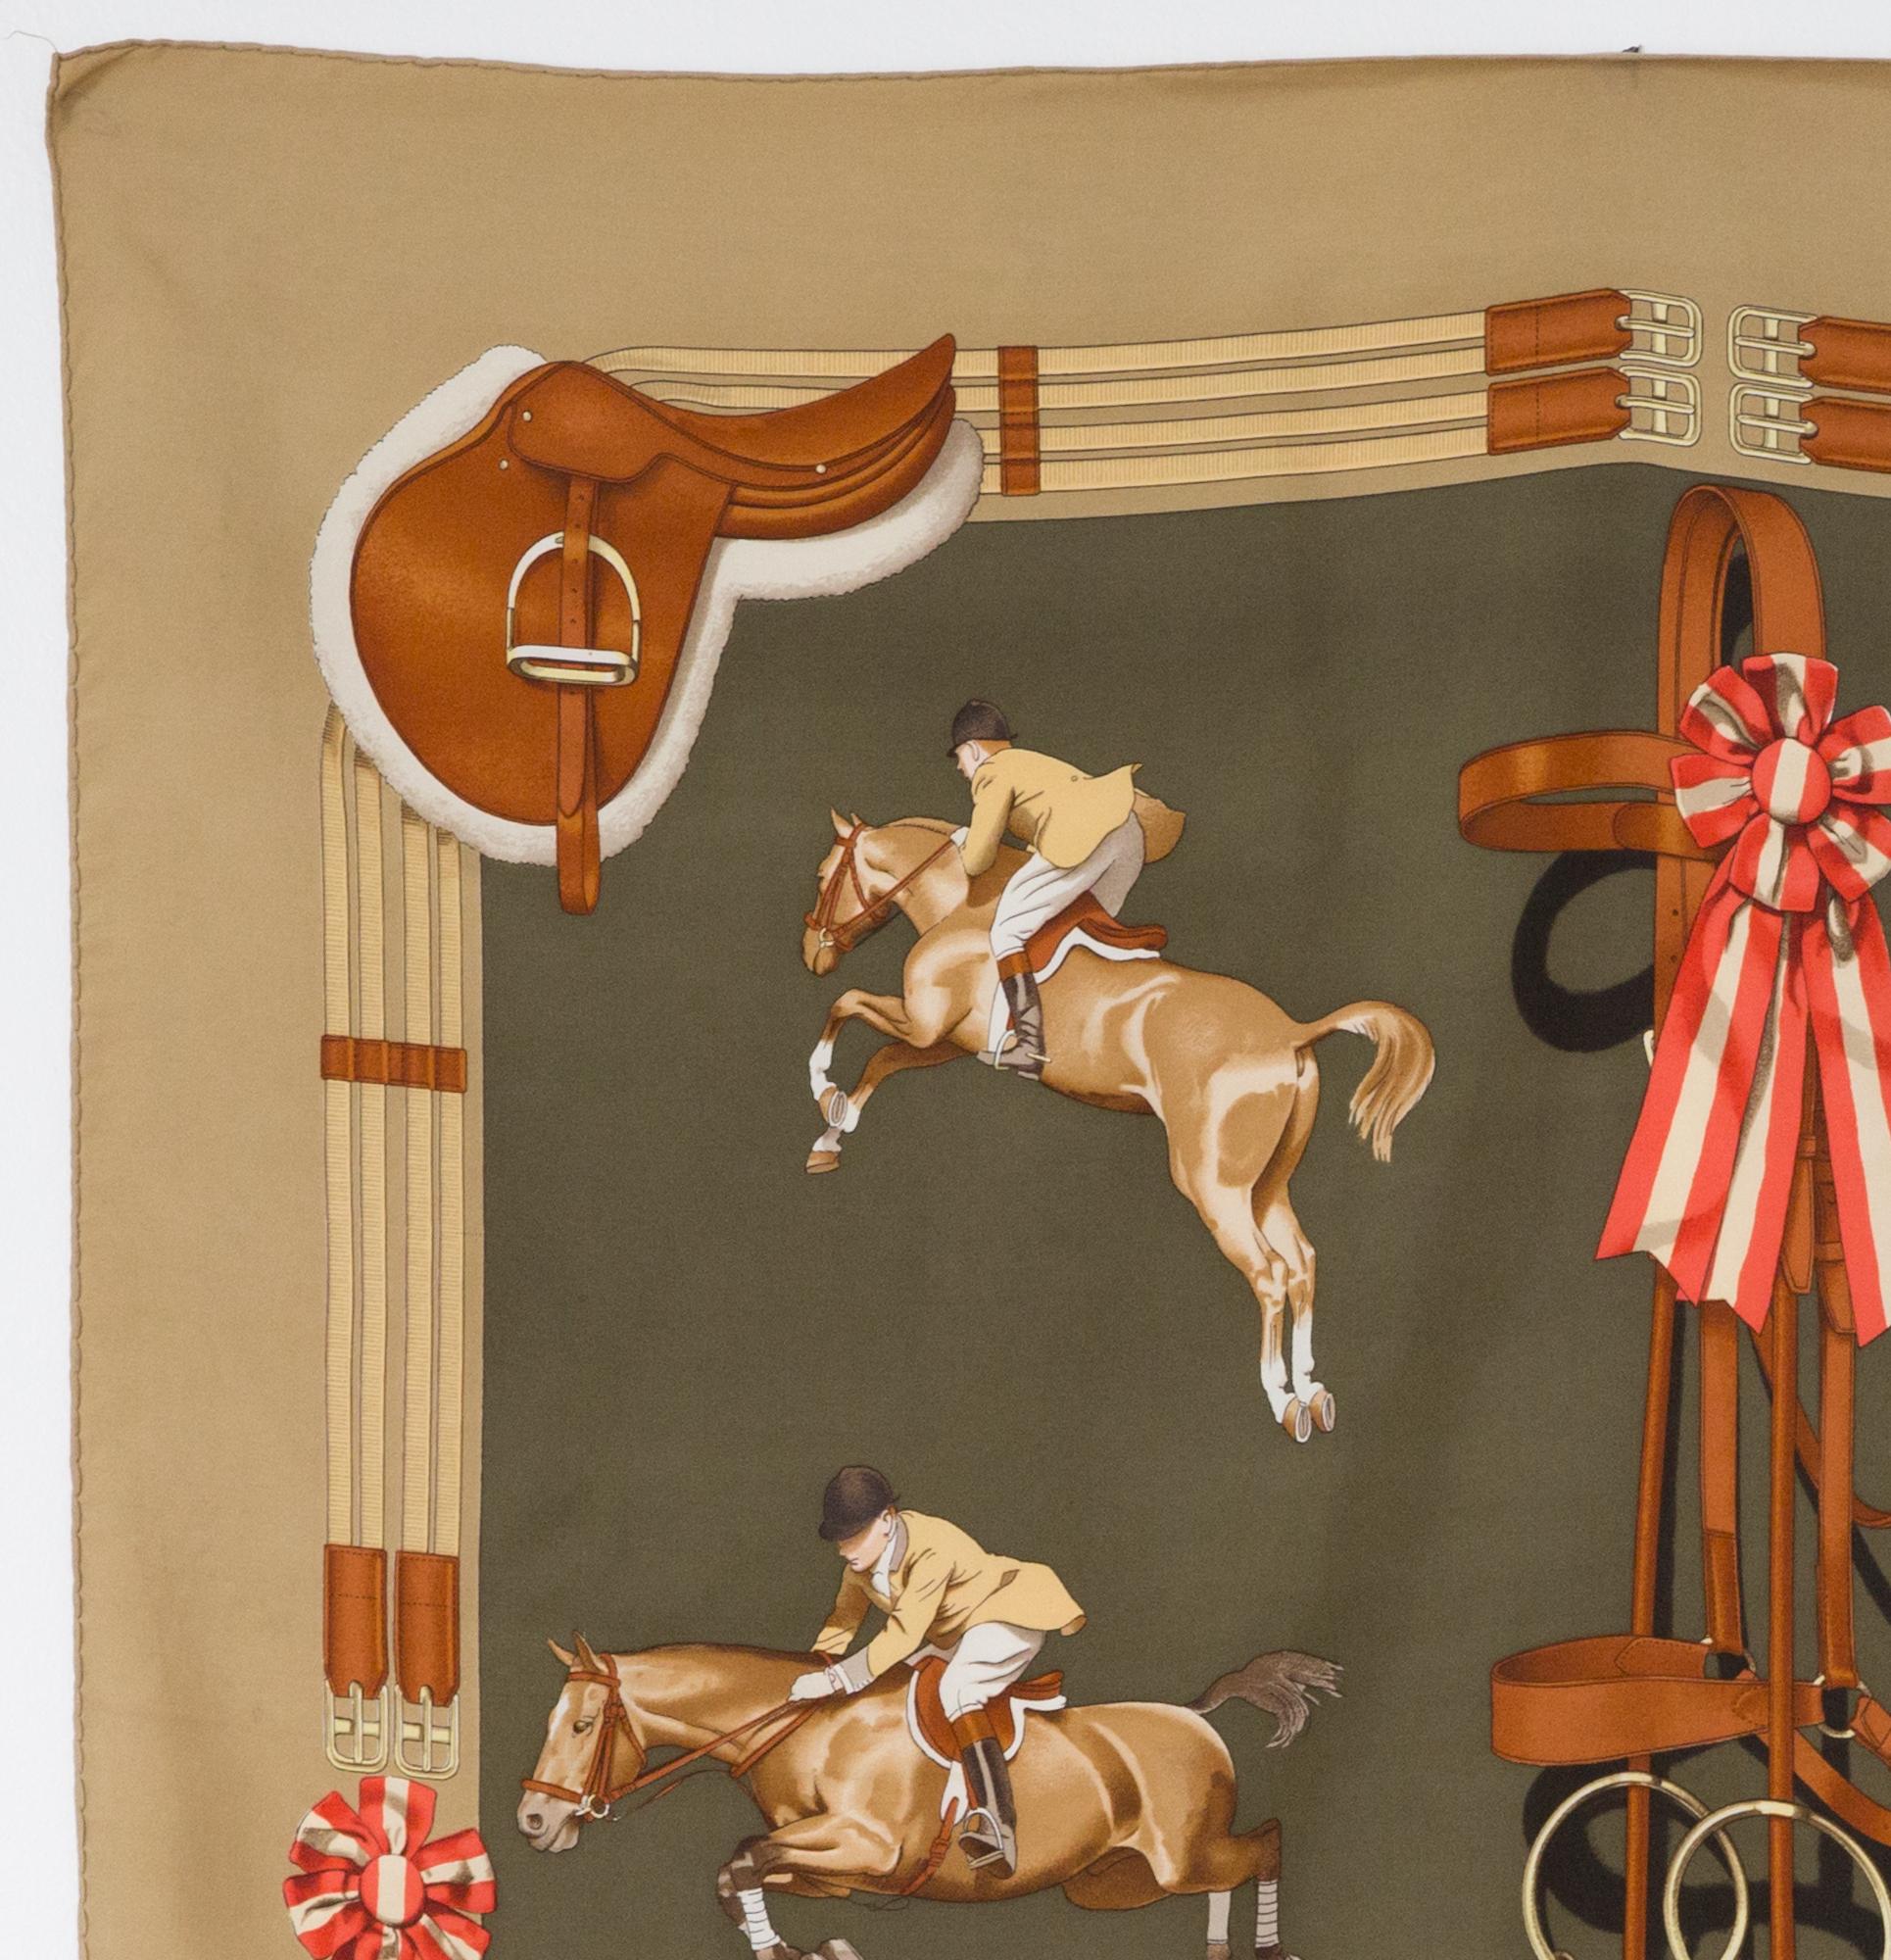 Hermes silk scarf Jumping by Philippe Ledoux featuring a camel border .
In good vintage condition. Made in France.
First edition 1971, then 1975
35,4in. (90cm)  X 35,4in. (90cm)
We guarantee you will receive this  iconic item as described and showed